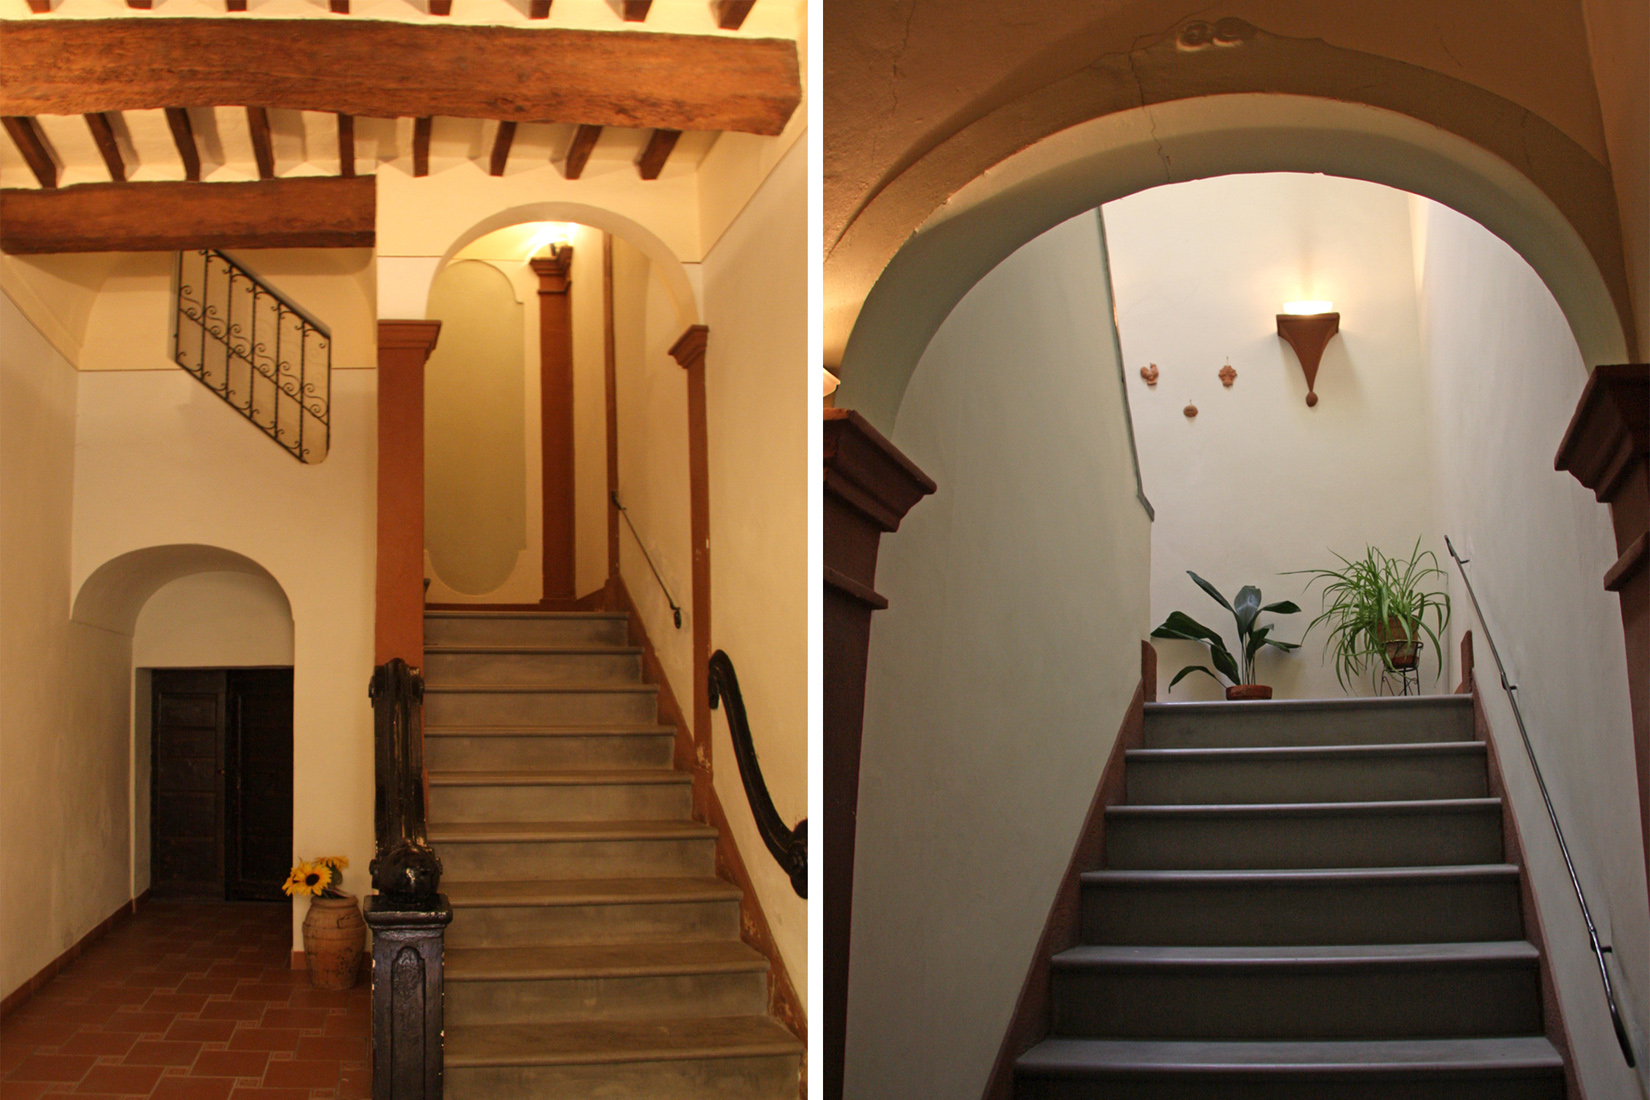 Interior hallway: entrance and stairs leading to apartment